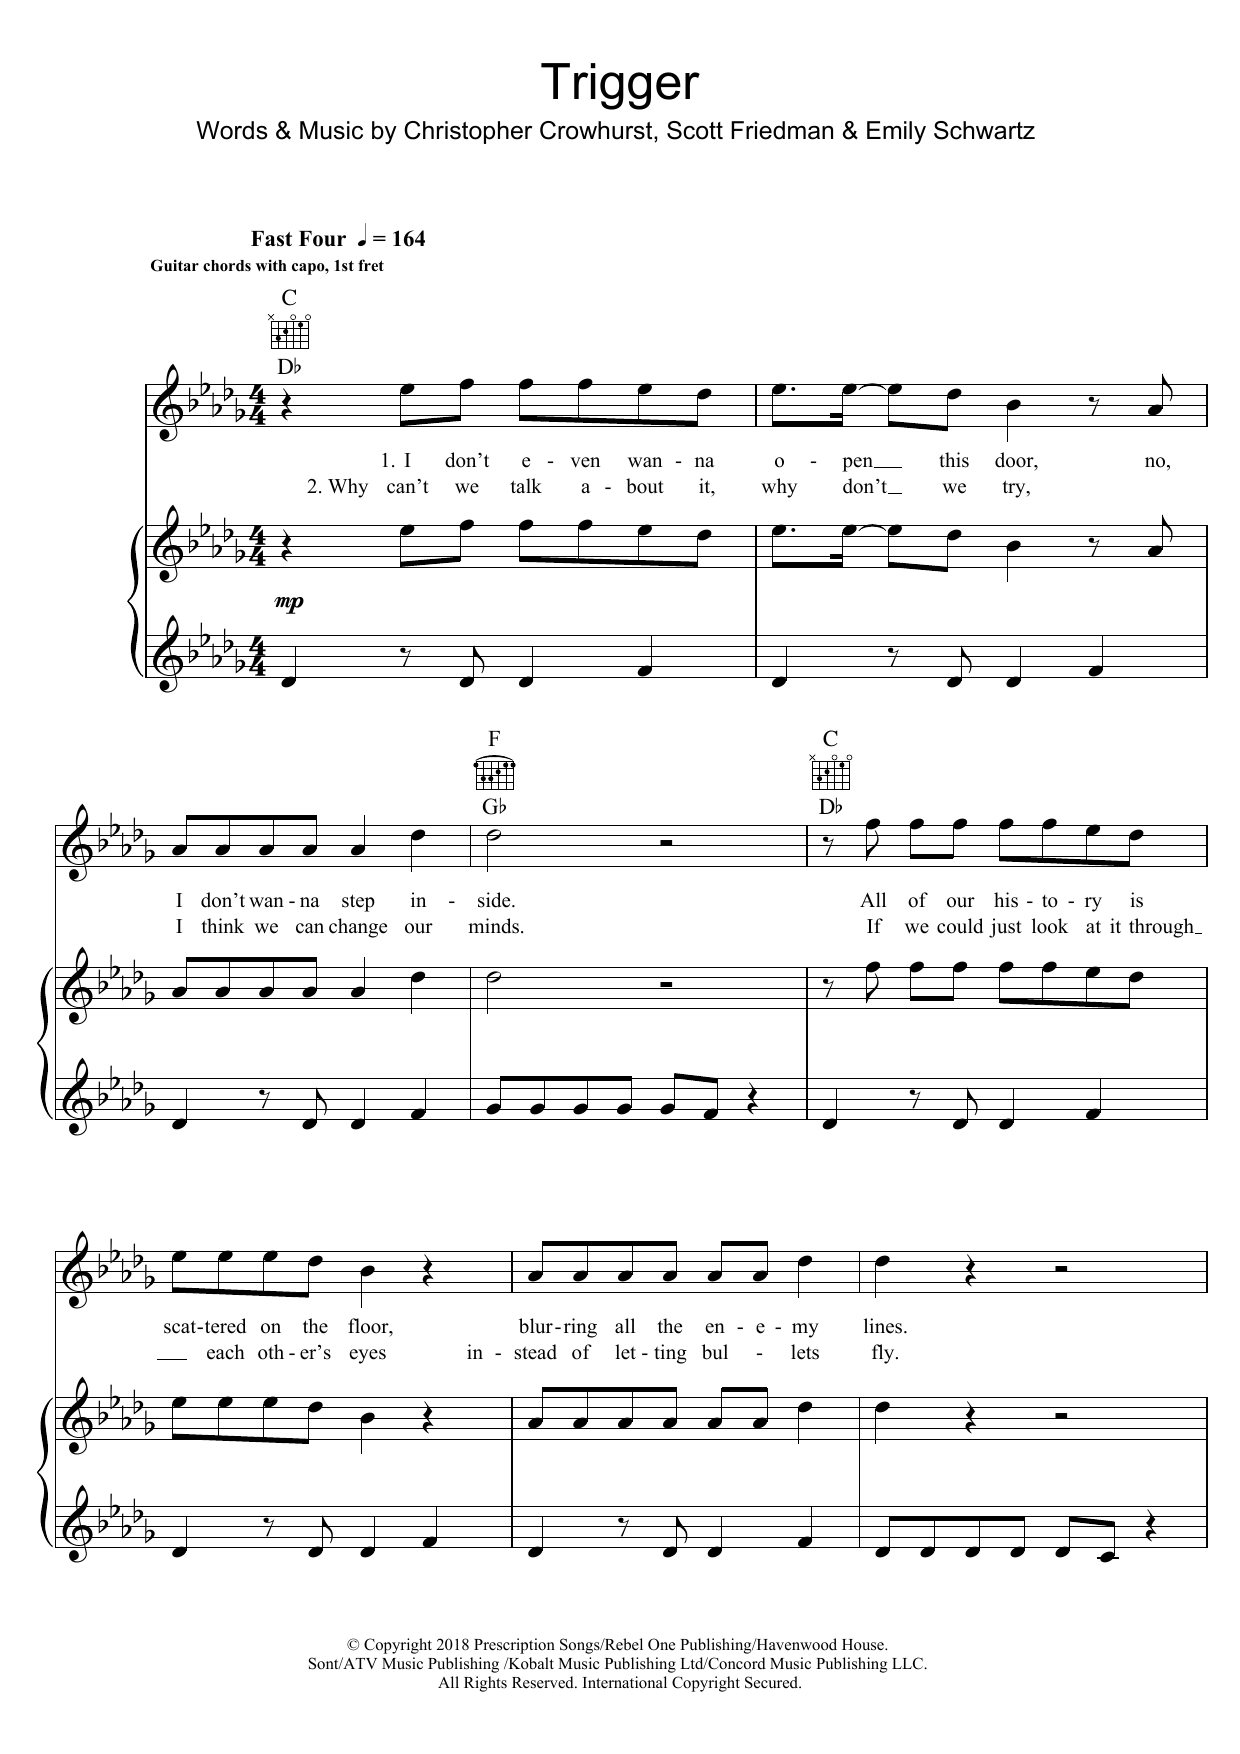 Download Anne-Marie Trigger Sheet Music